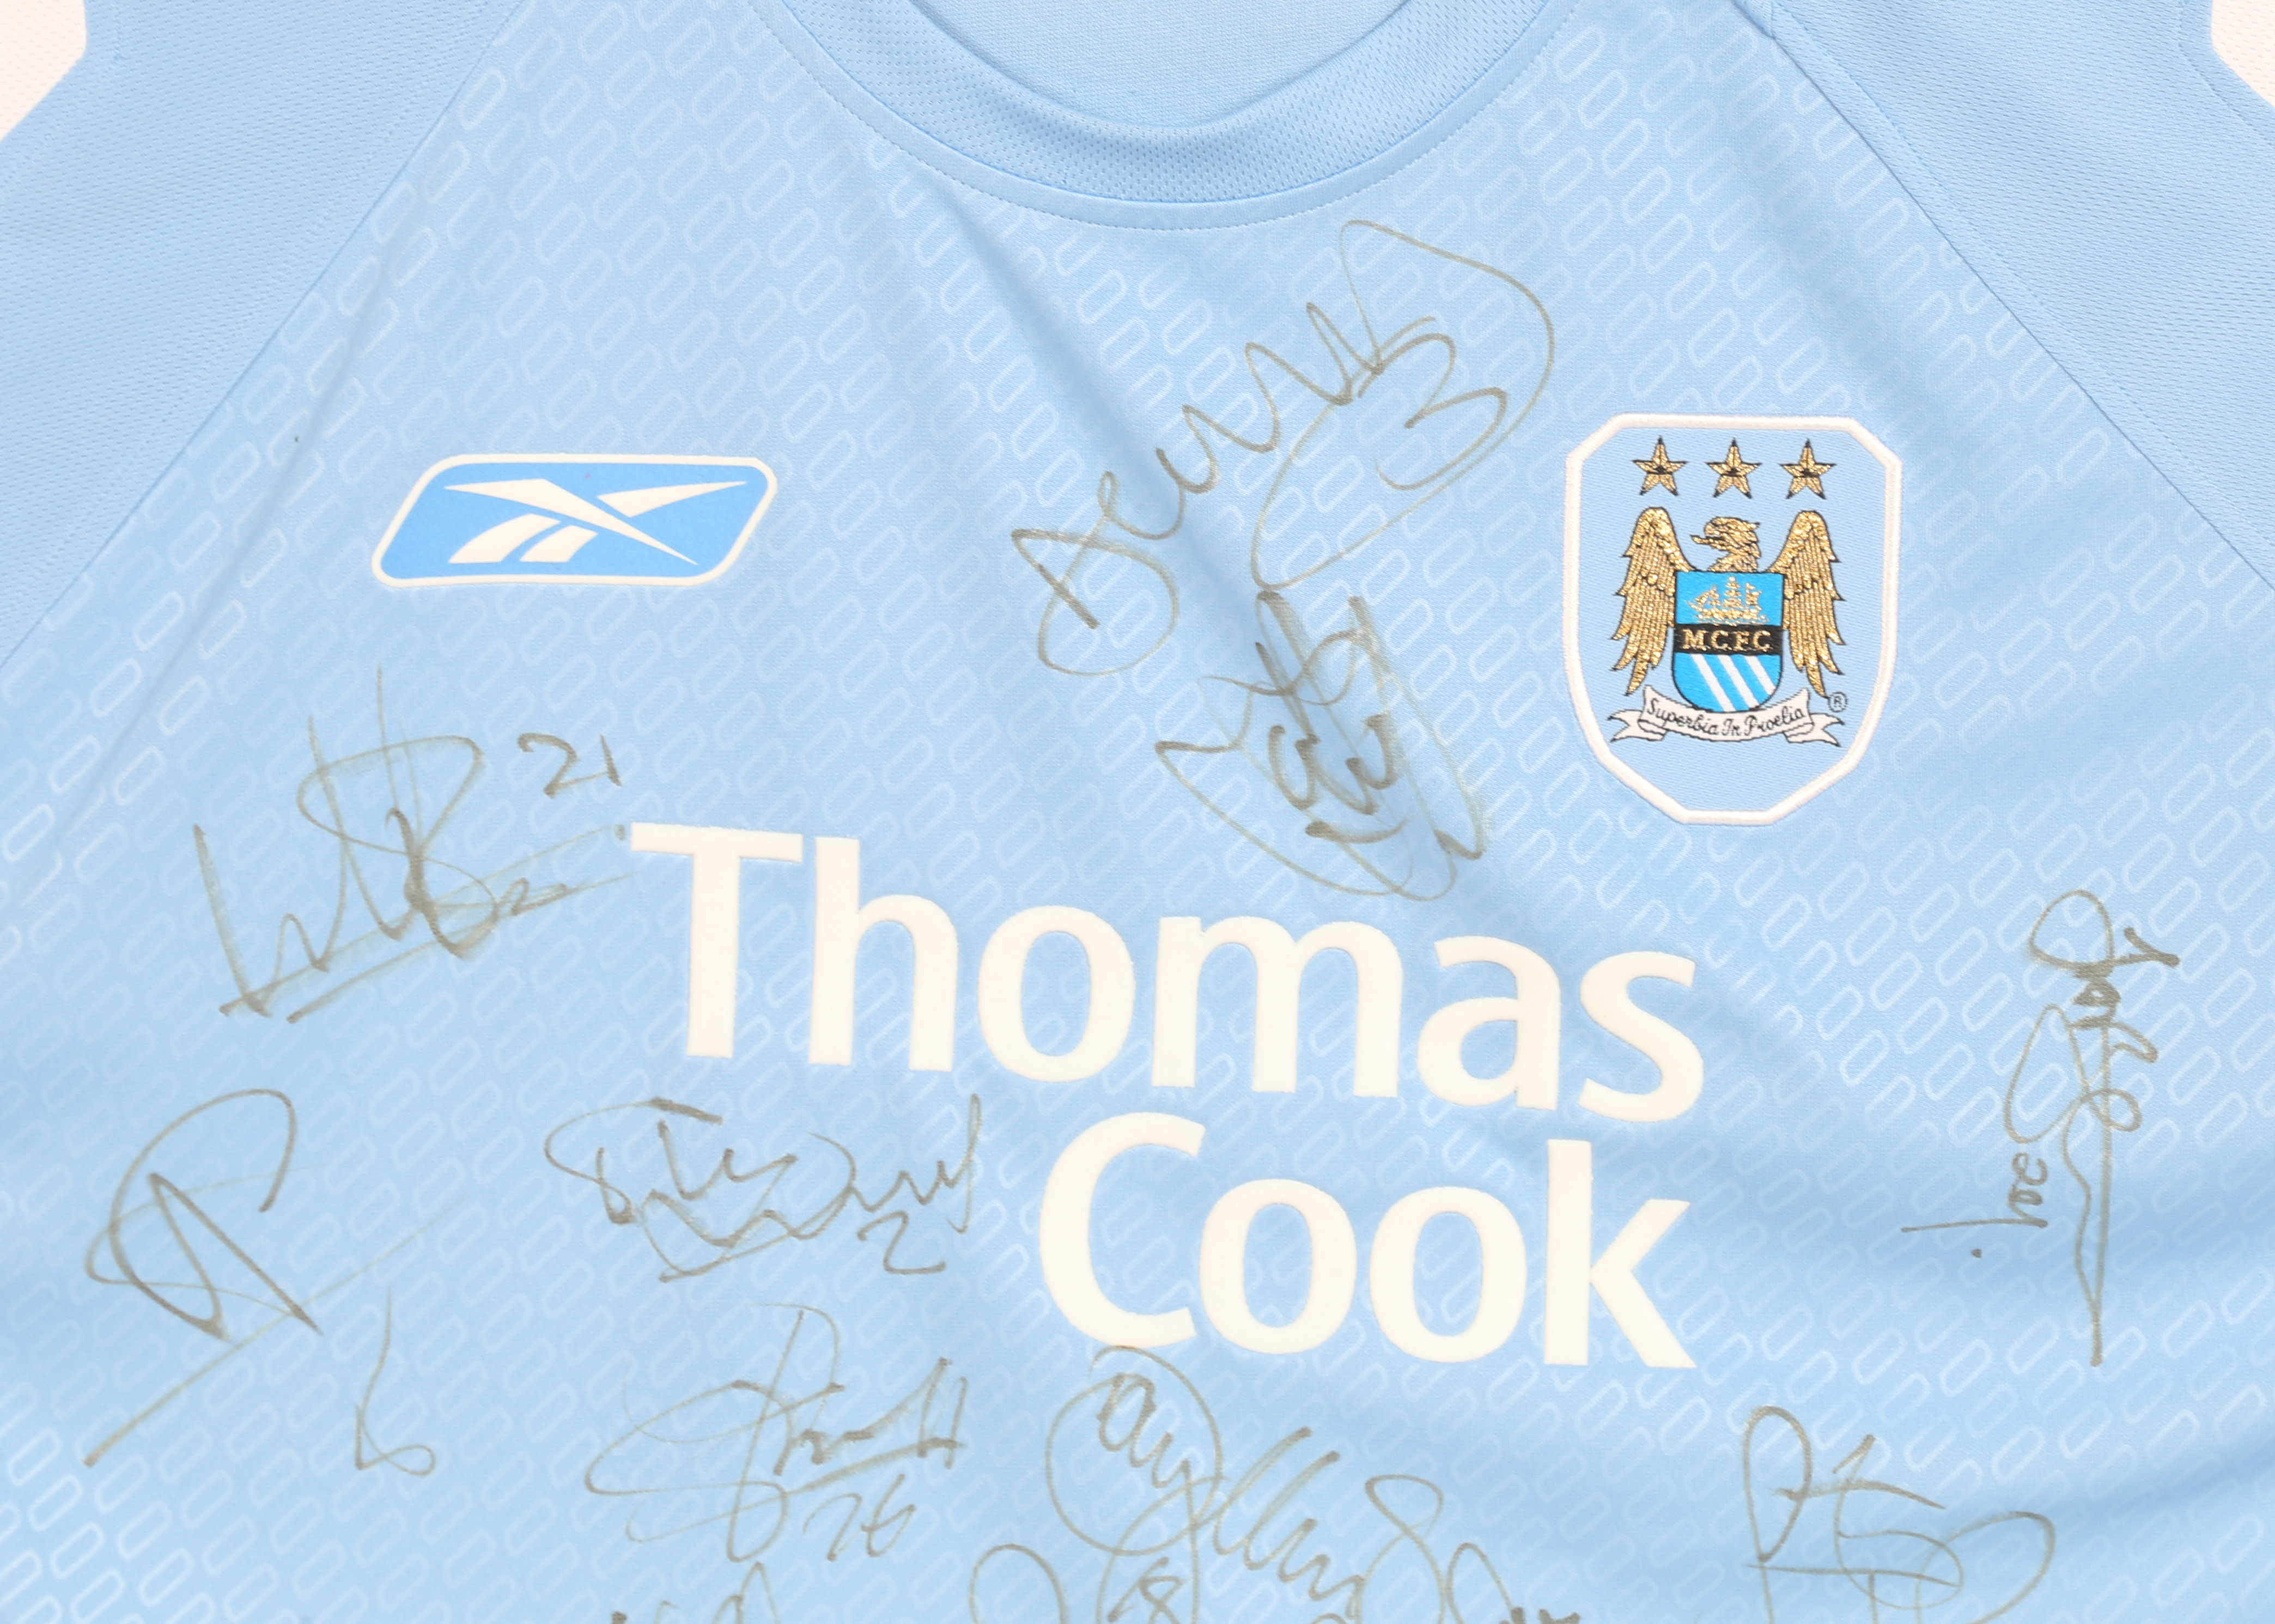 Manchester City F.C. 2004/05 Home shirt (UK L) autographed by Robbie Fowler, Joey Barton, David - Image 2 of 5